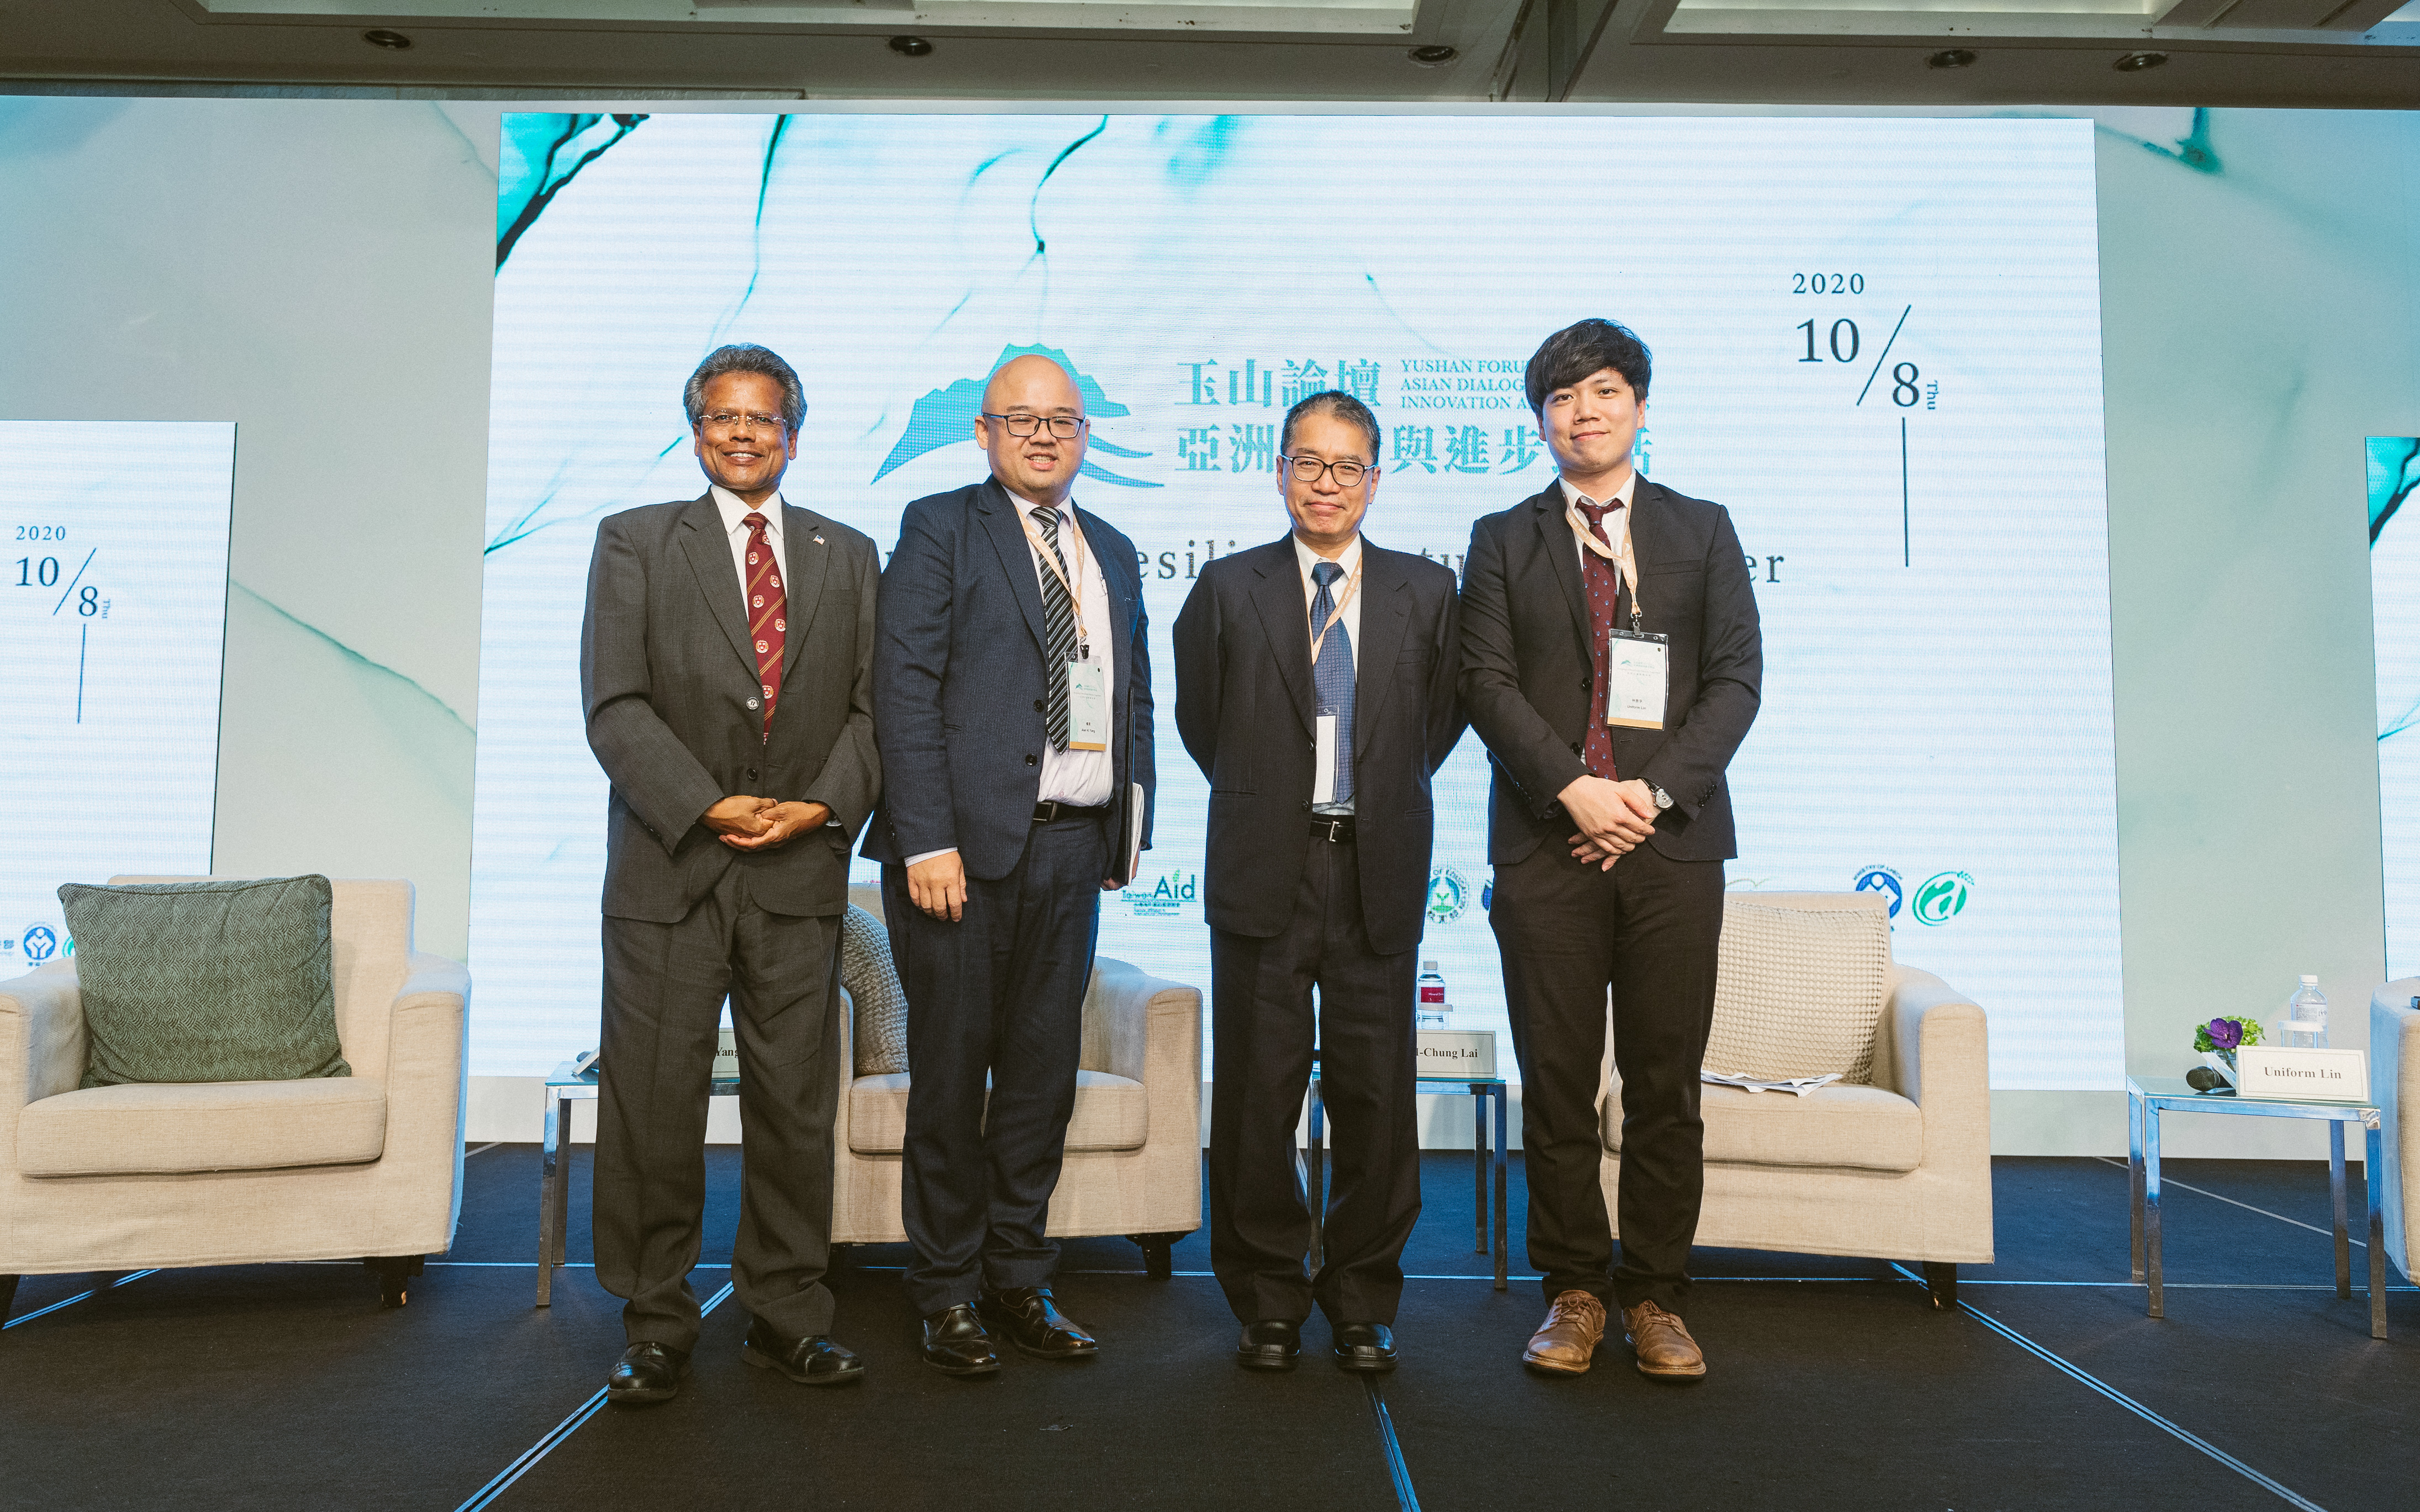 Group photo of panelists in Taiwan